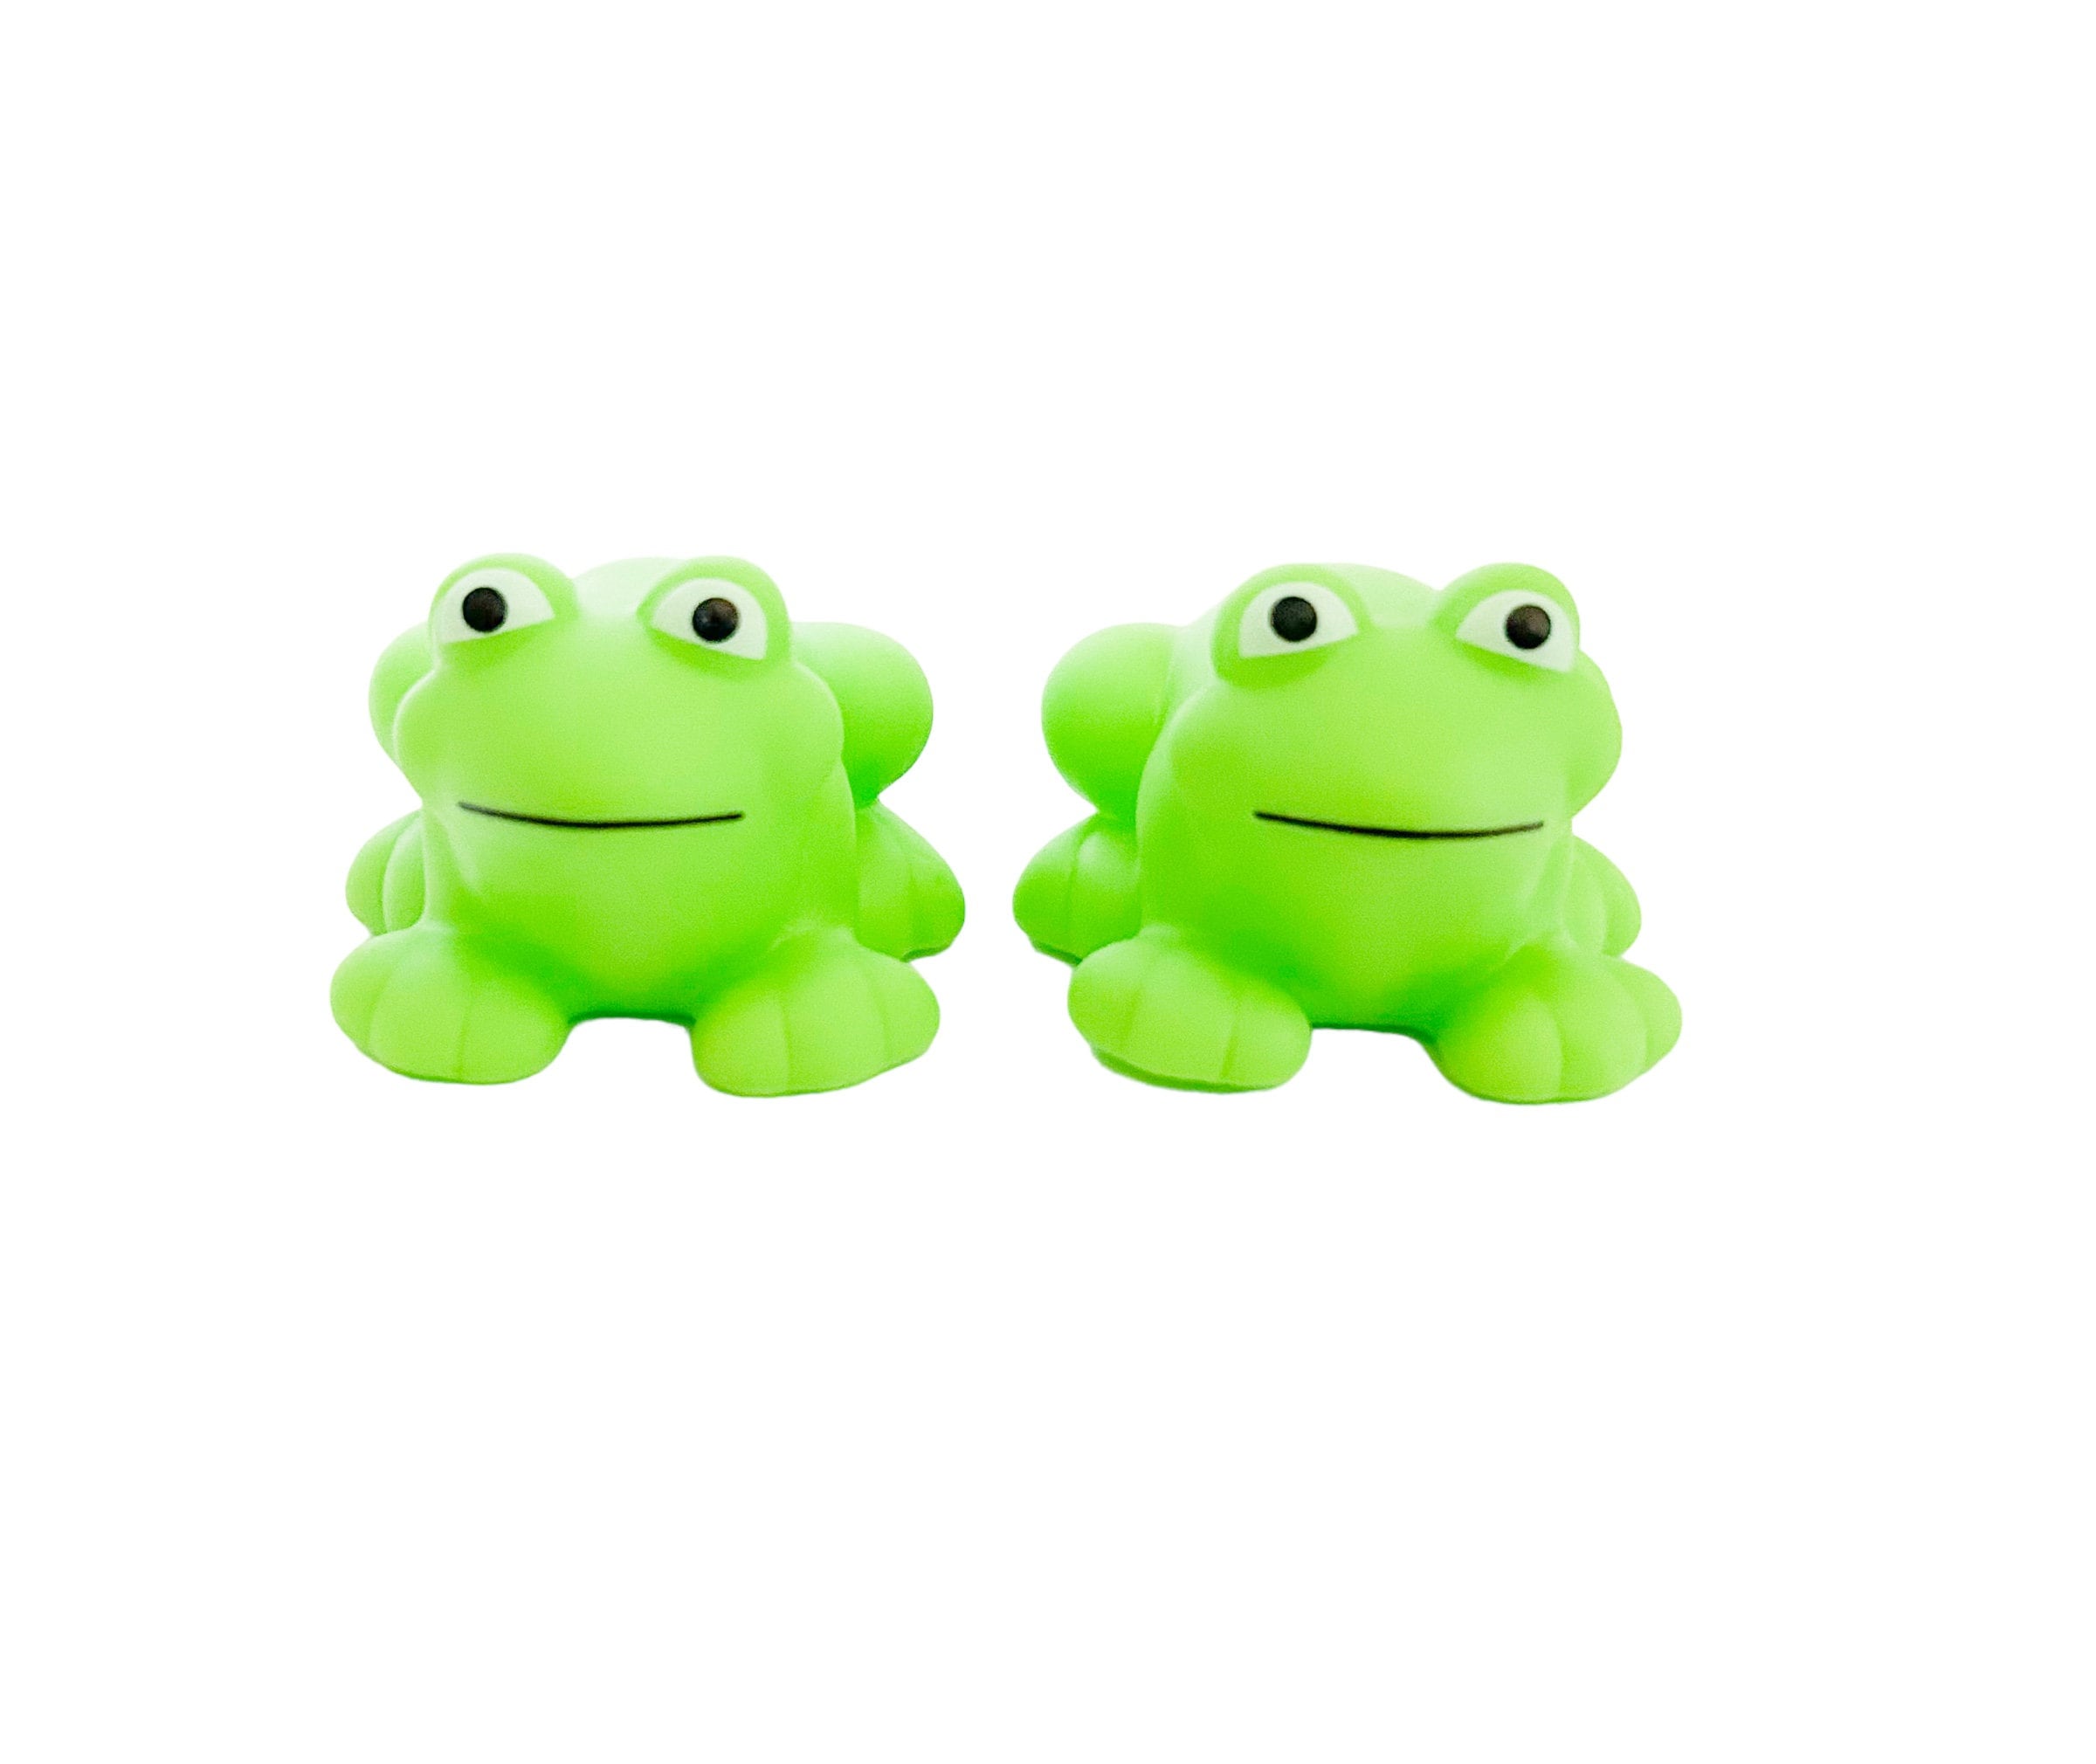 Adorable Green Frog Themed Rubber Duck Ducks Reptile Animal Outdoors  Individual or Pack of 2 